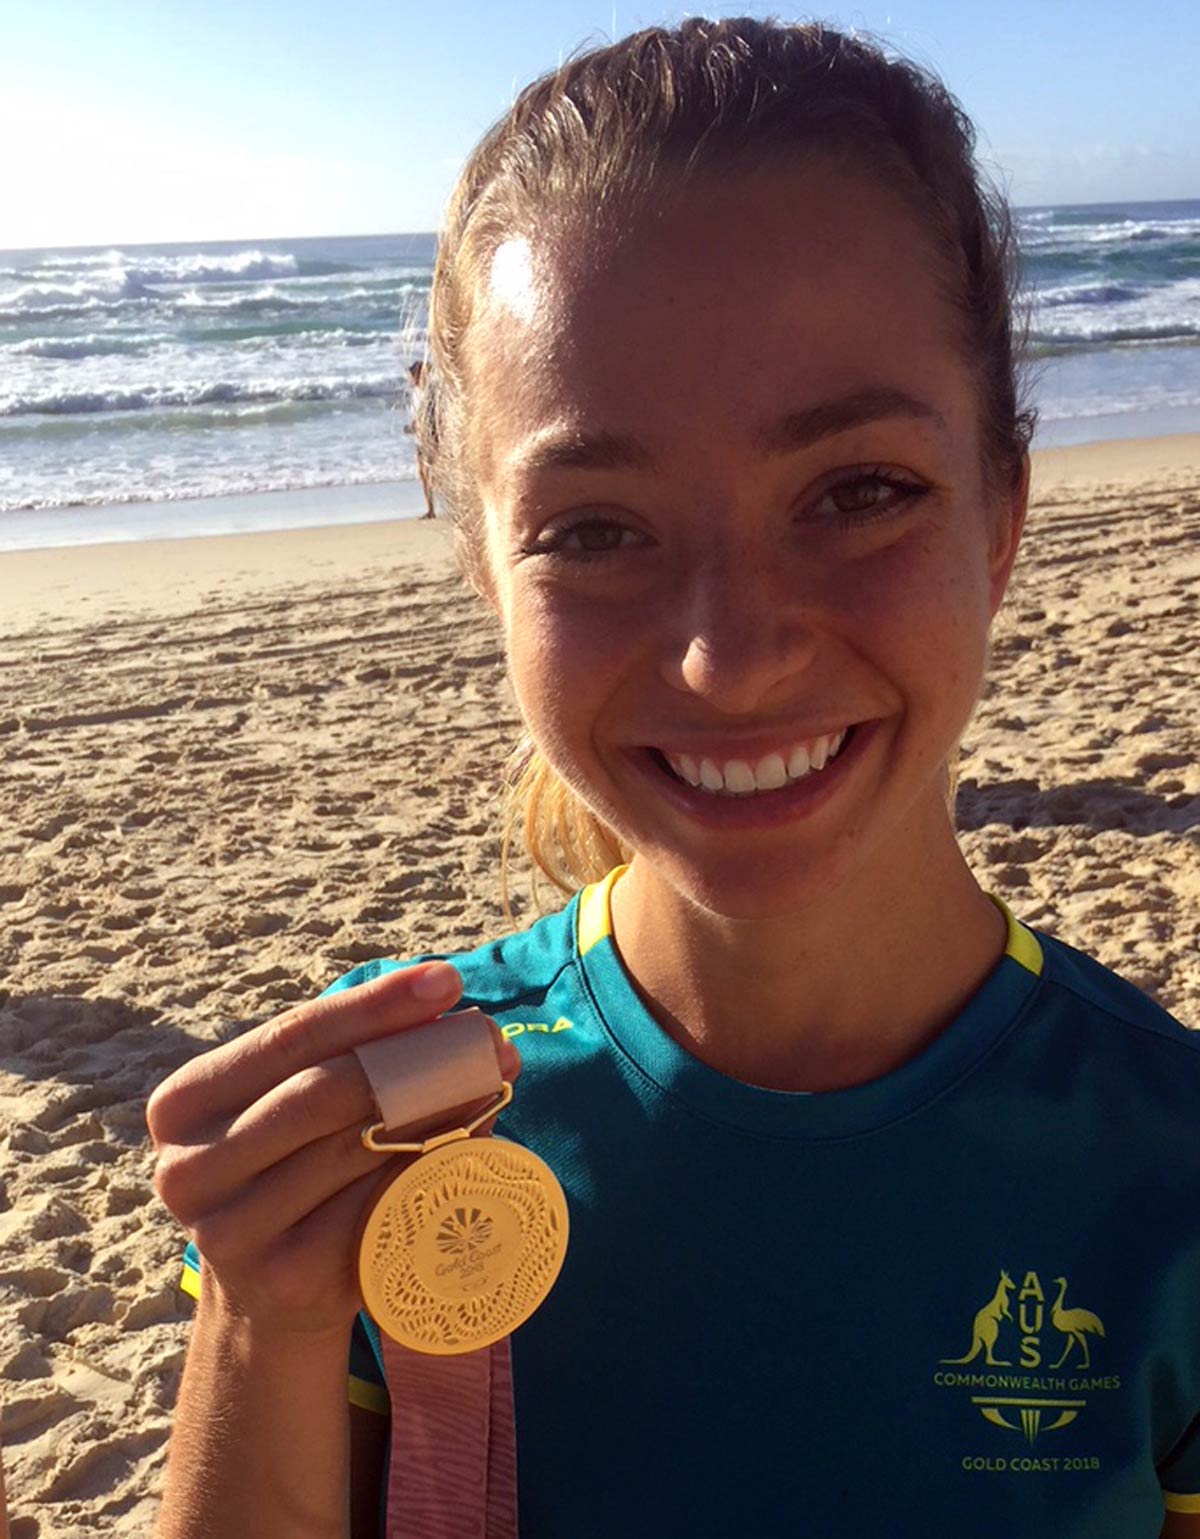 Elite athlete Jemima Montag shows her gold Commonwealth Games medal